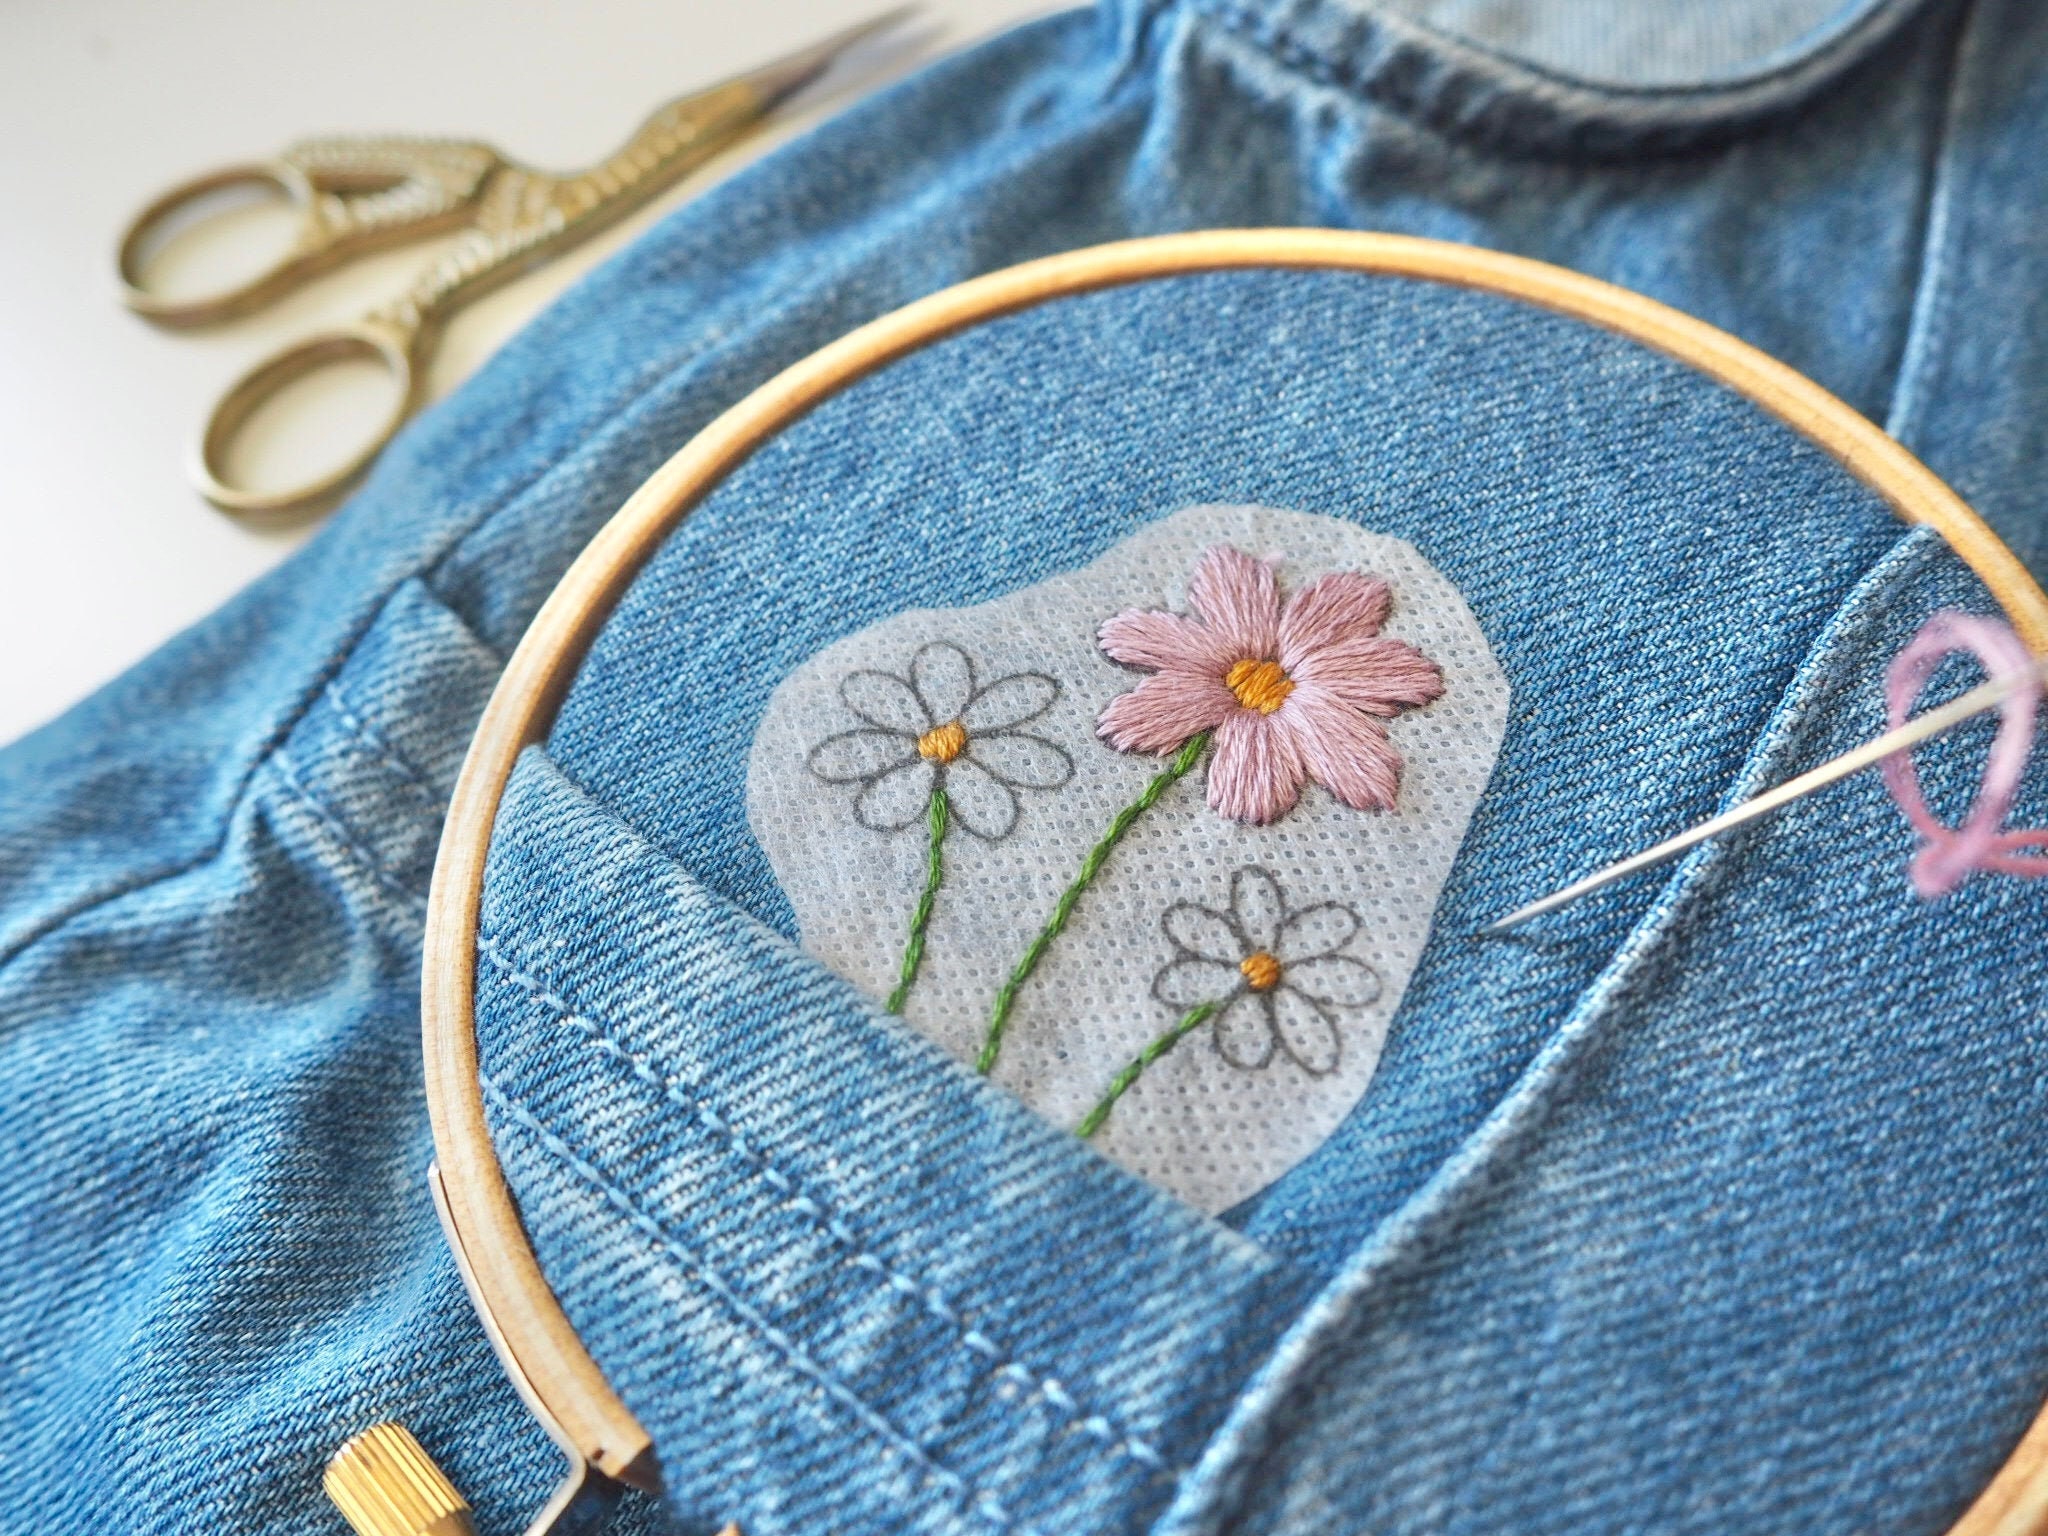 Floral Stick and Stitch Embroidery Patches – And so to Shop